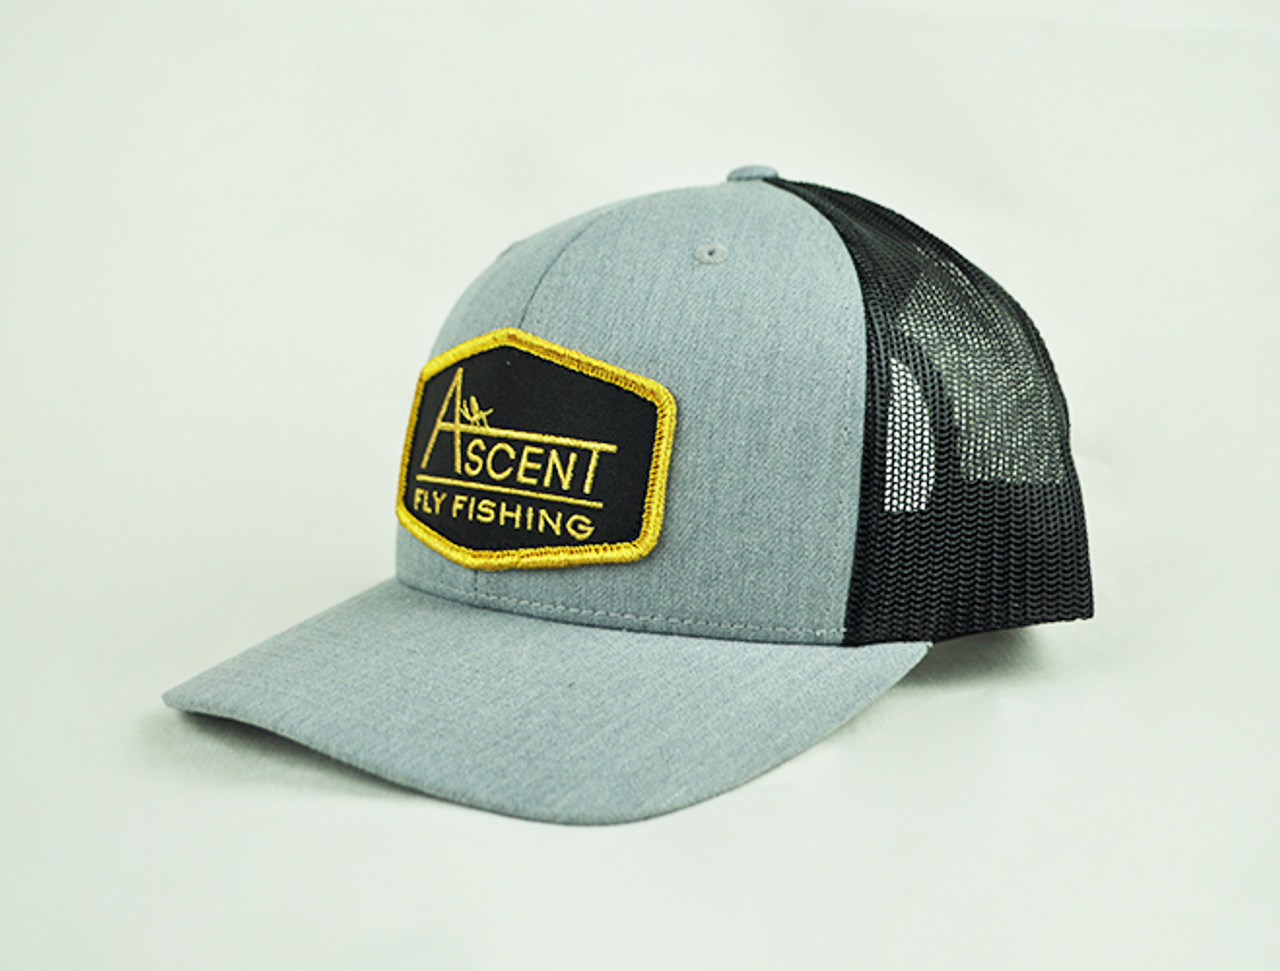 https://cdn11.bigcommerce.com/s-u24ja/images/stencil/1280x1280/products/451/1175/ascent_fly_fishing_patch_hat_grey_profile__78611.1699912907.jpg?c=2